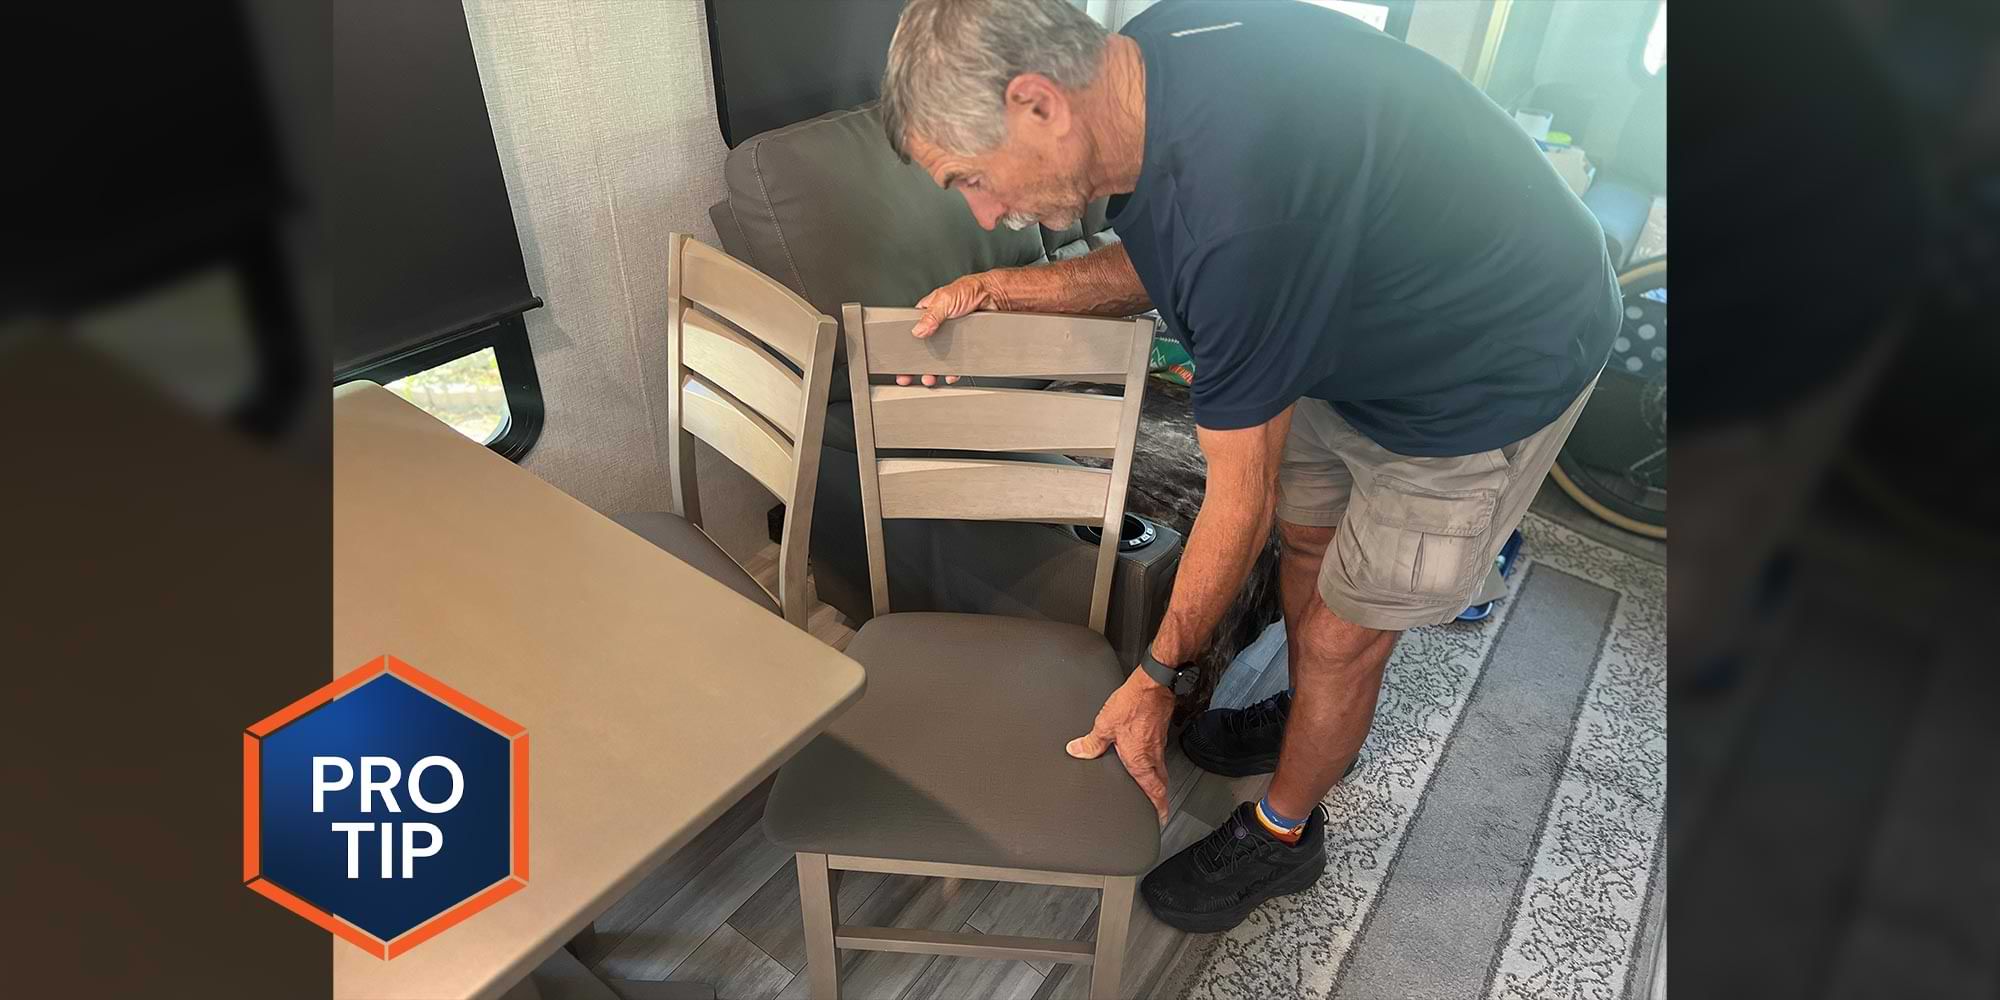 a man pushes an RV kitchen chair into its place under a table